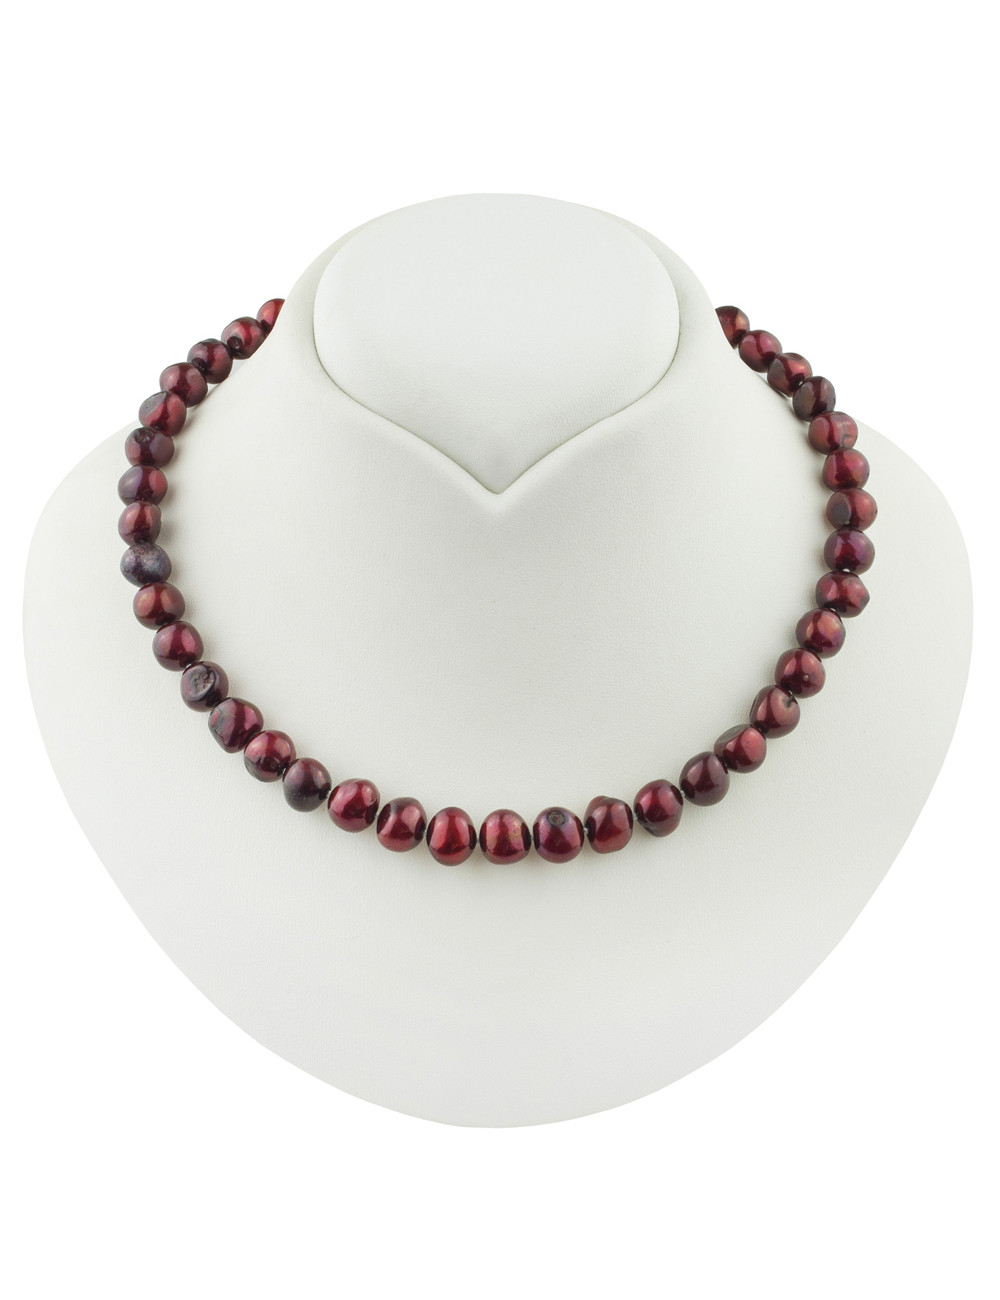 Necklace of maroon pearls with irregular shapes and high shine NB7585S